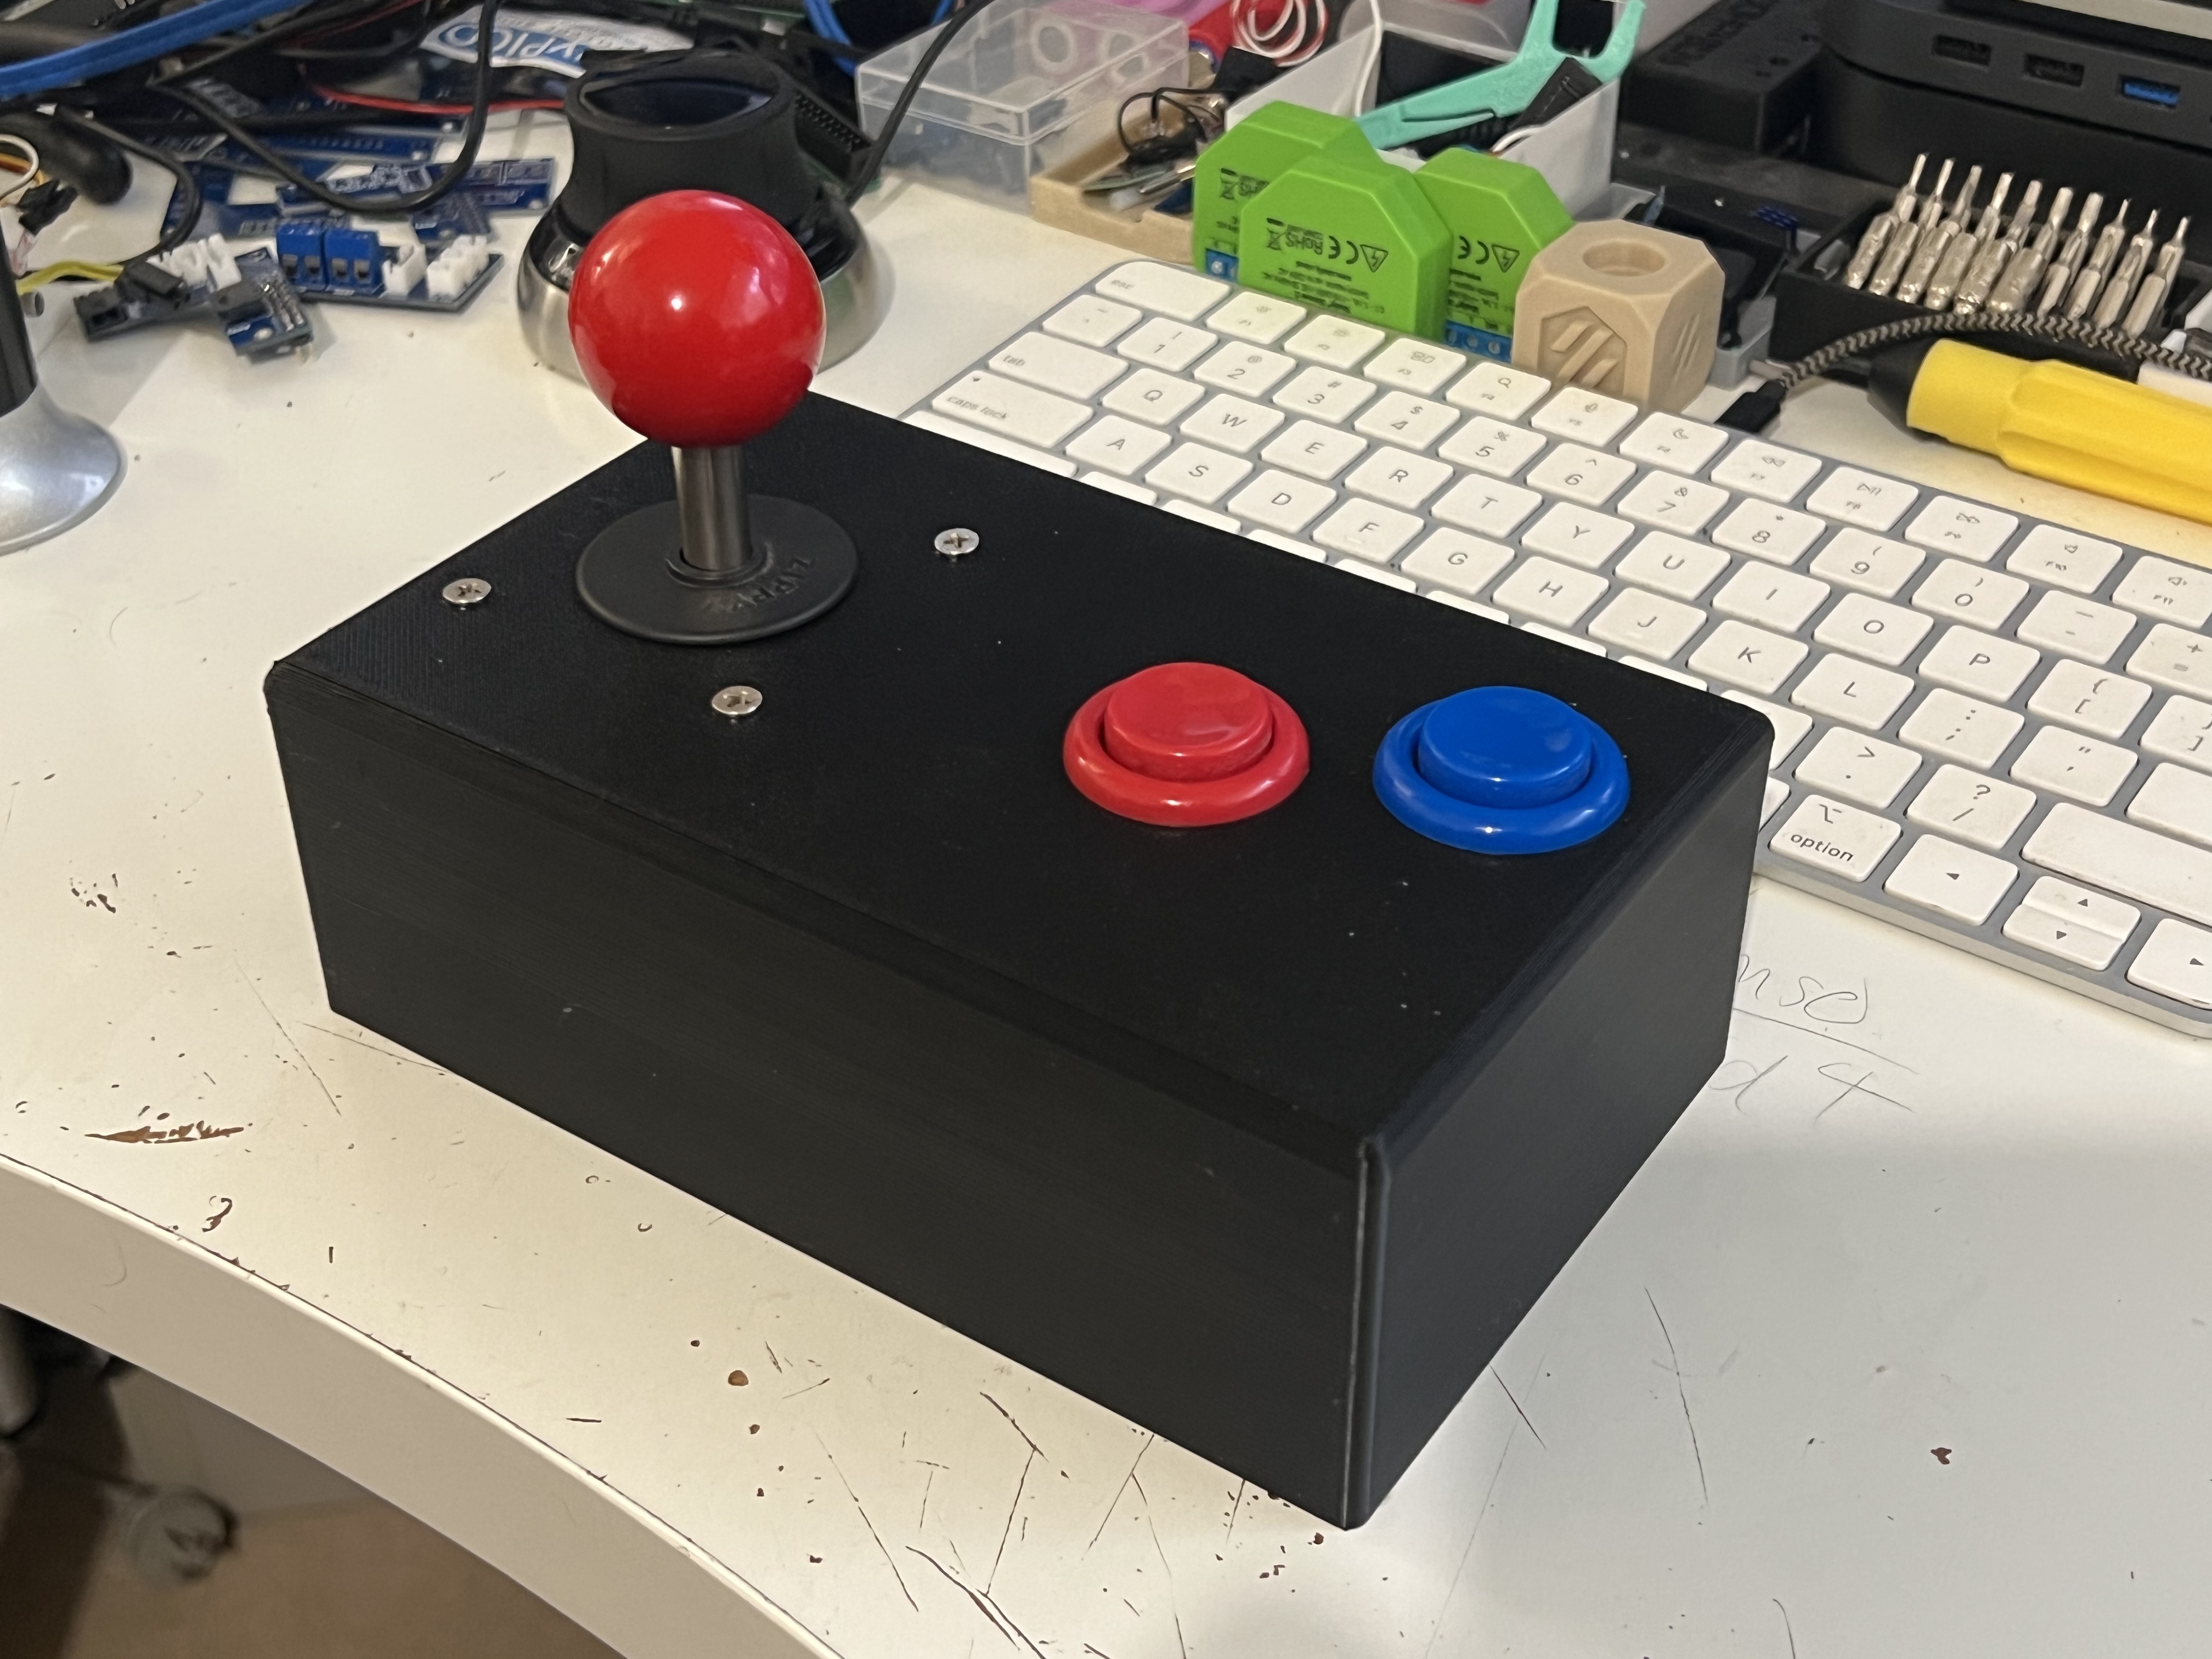 2nd Stage Creations Buttonbox Review - The Arcade Stick